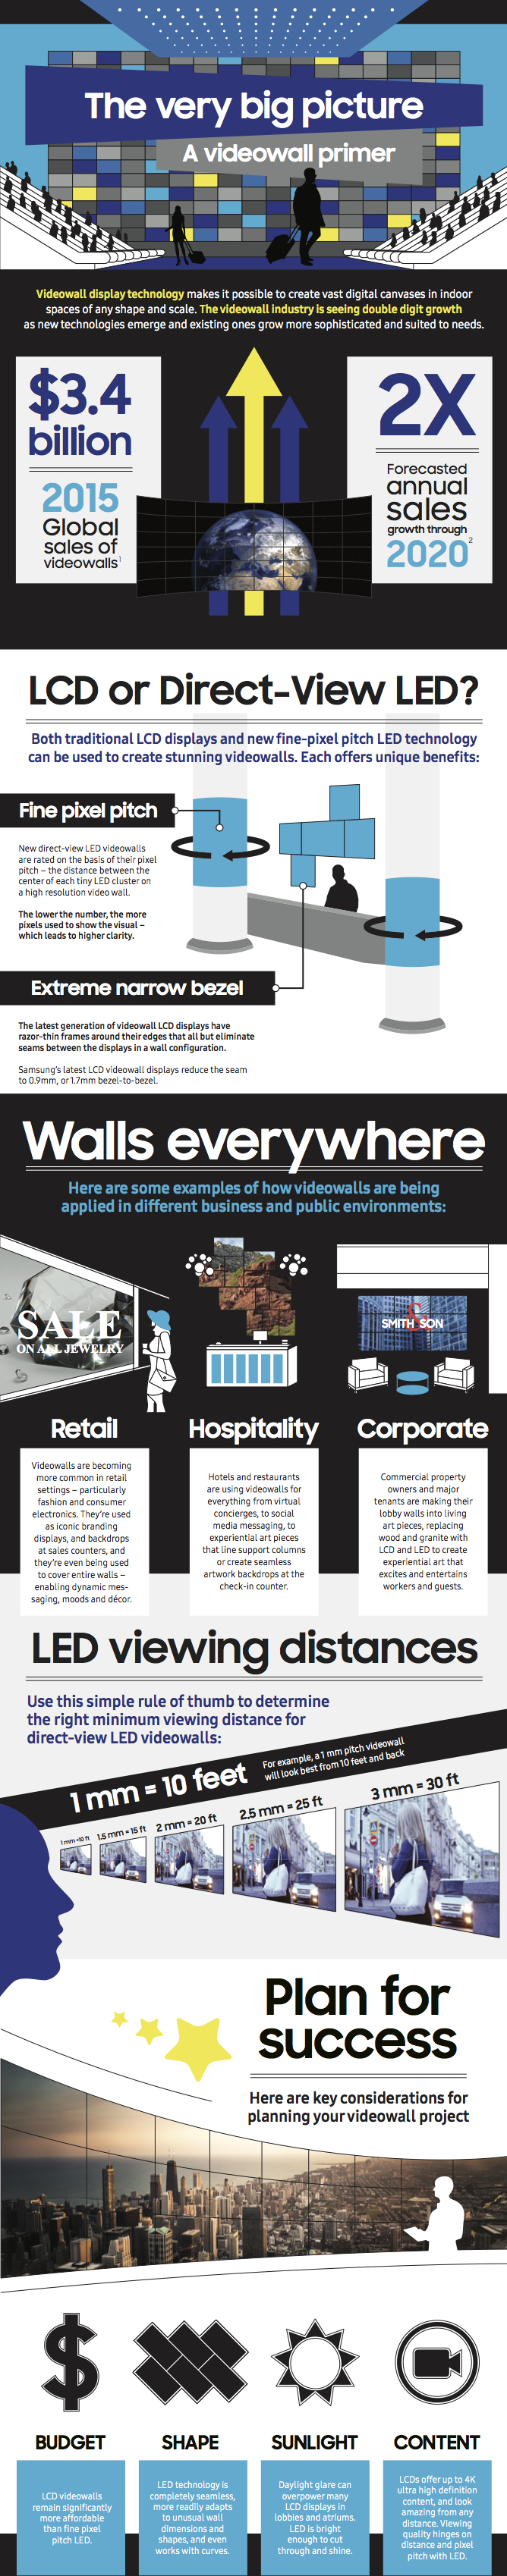 infographic on video wall display technology